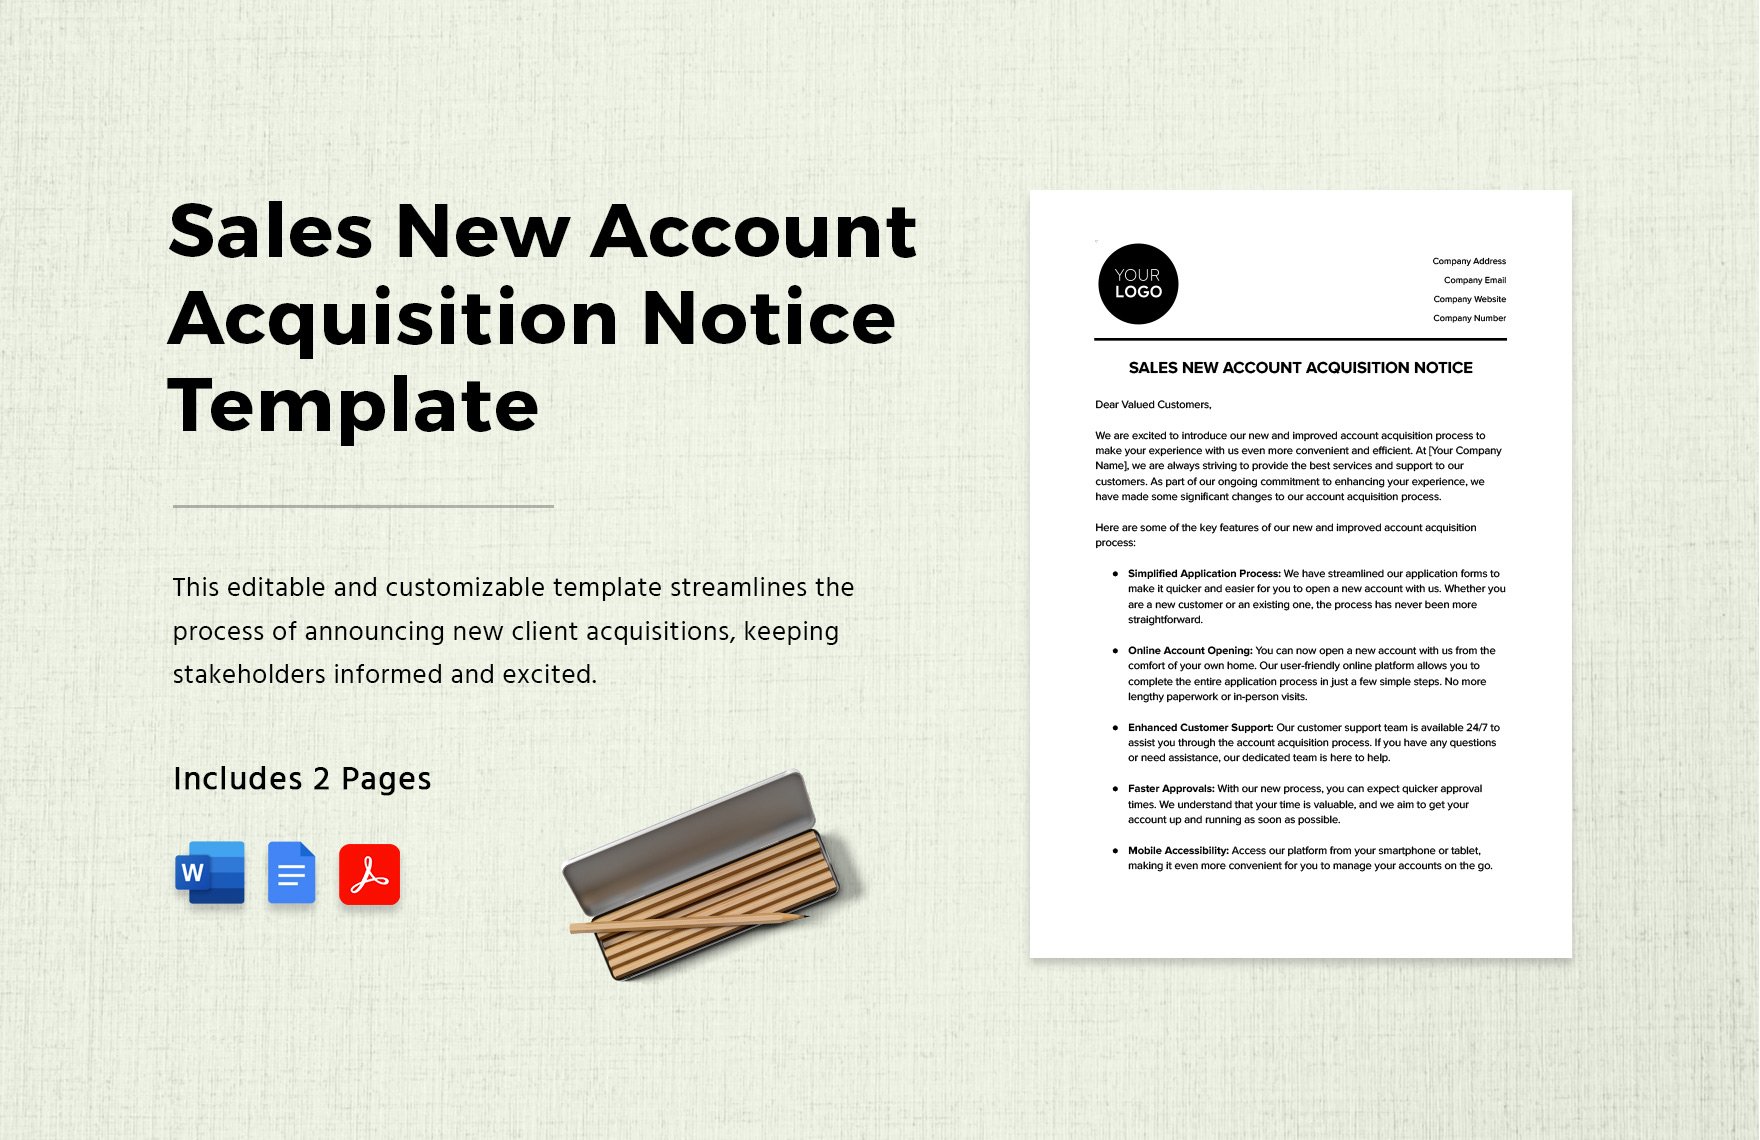 Sales New Account Acquisition Notice Template in Word, Google Docs, PDF